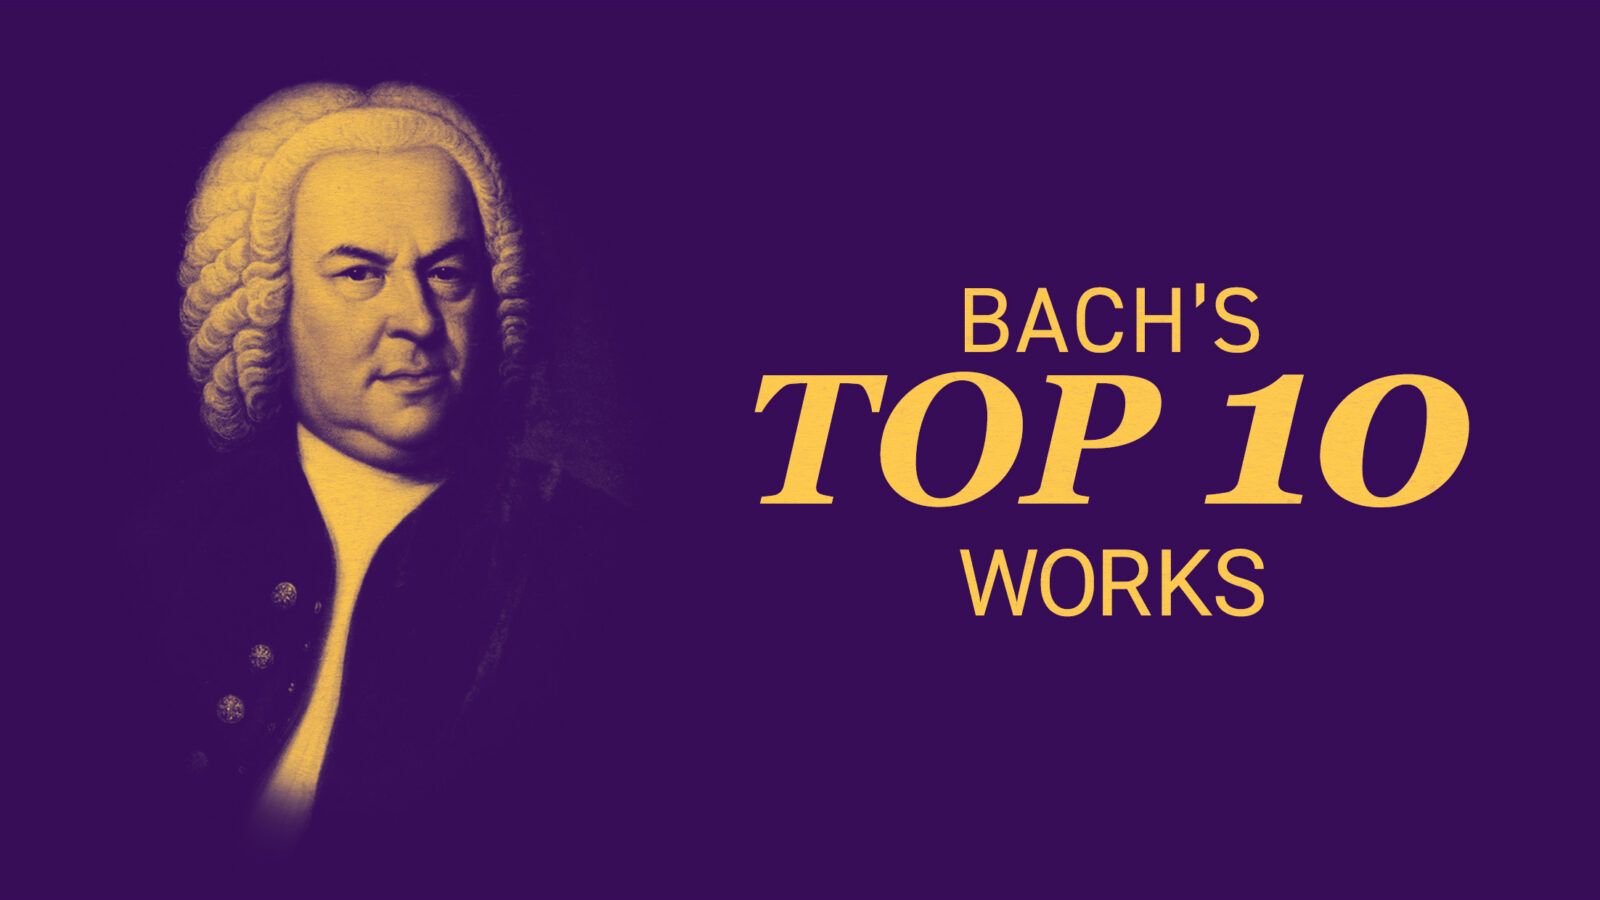 Featured image for “Bach’s Top 10 Works”